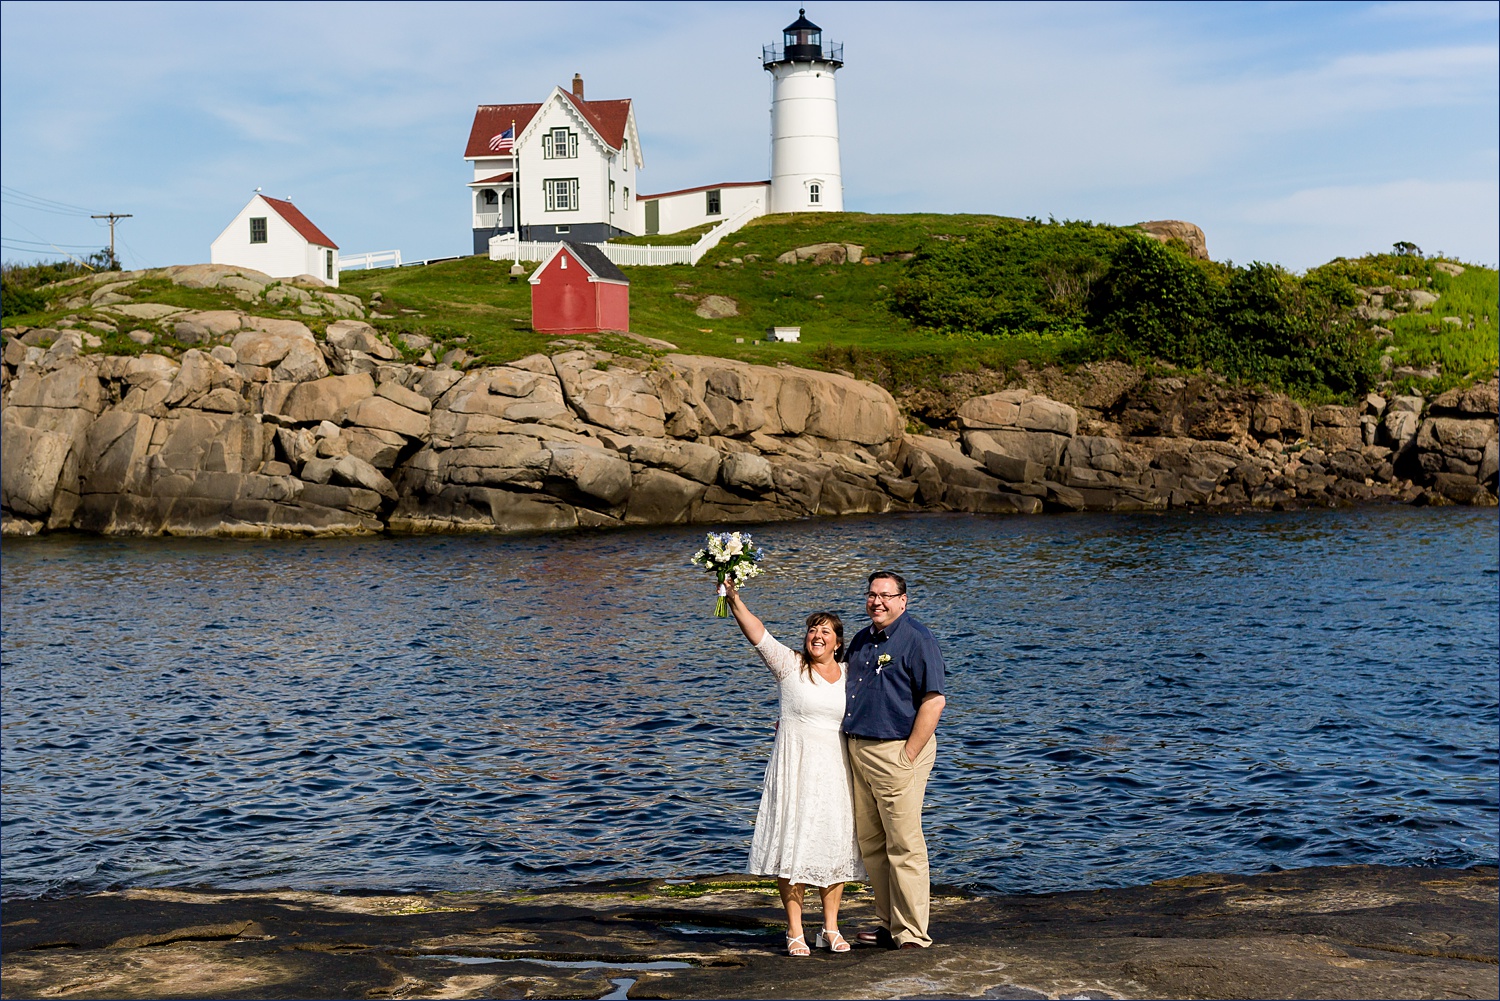 Waving to family before they elope at Nubble Lighthouse in York Maine